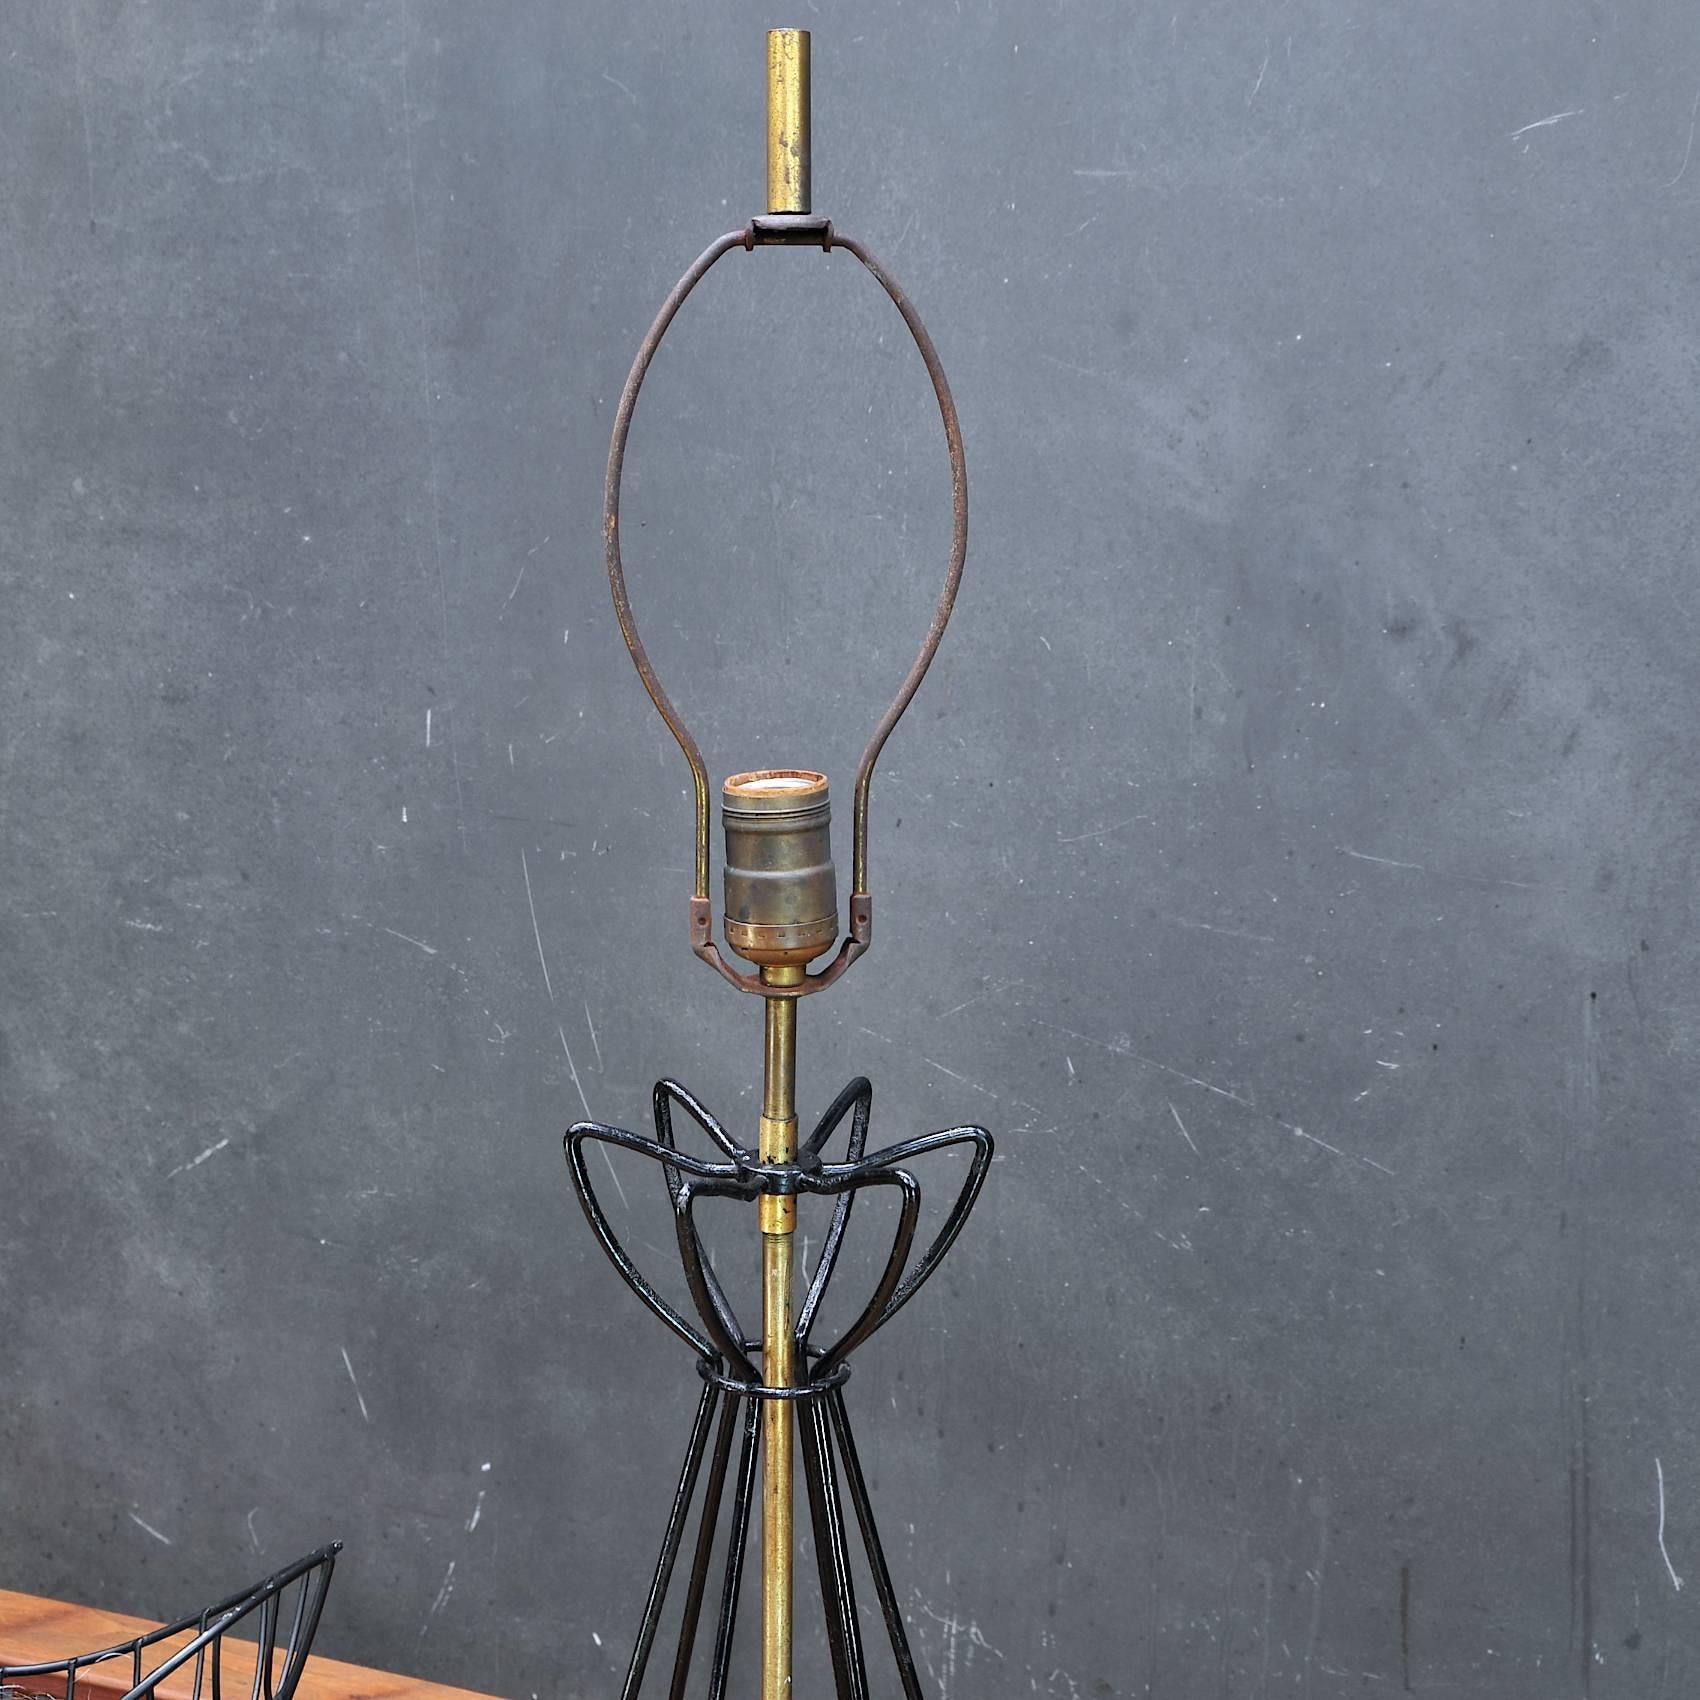 Andree Ferris & Reta Shacknove, most celebrated Mid-Century female Industrial Design team. A structural bent wire and brass table lamp. Original Fairies socketry and two stage switch marked with F. original finial. No shade.